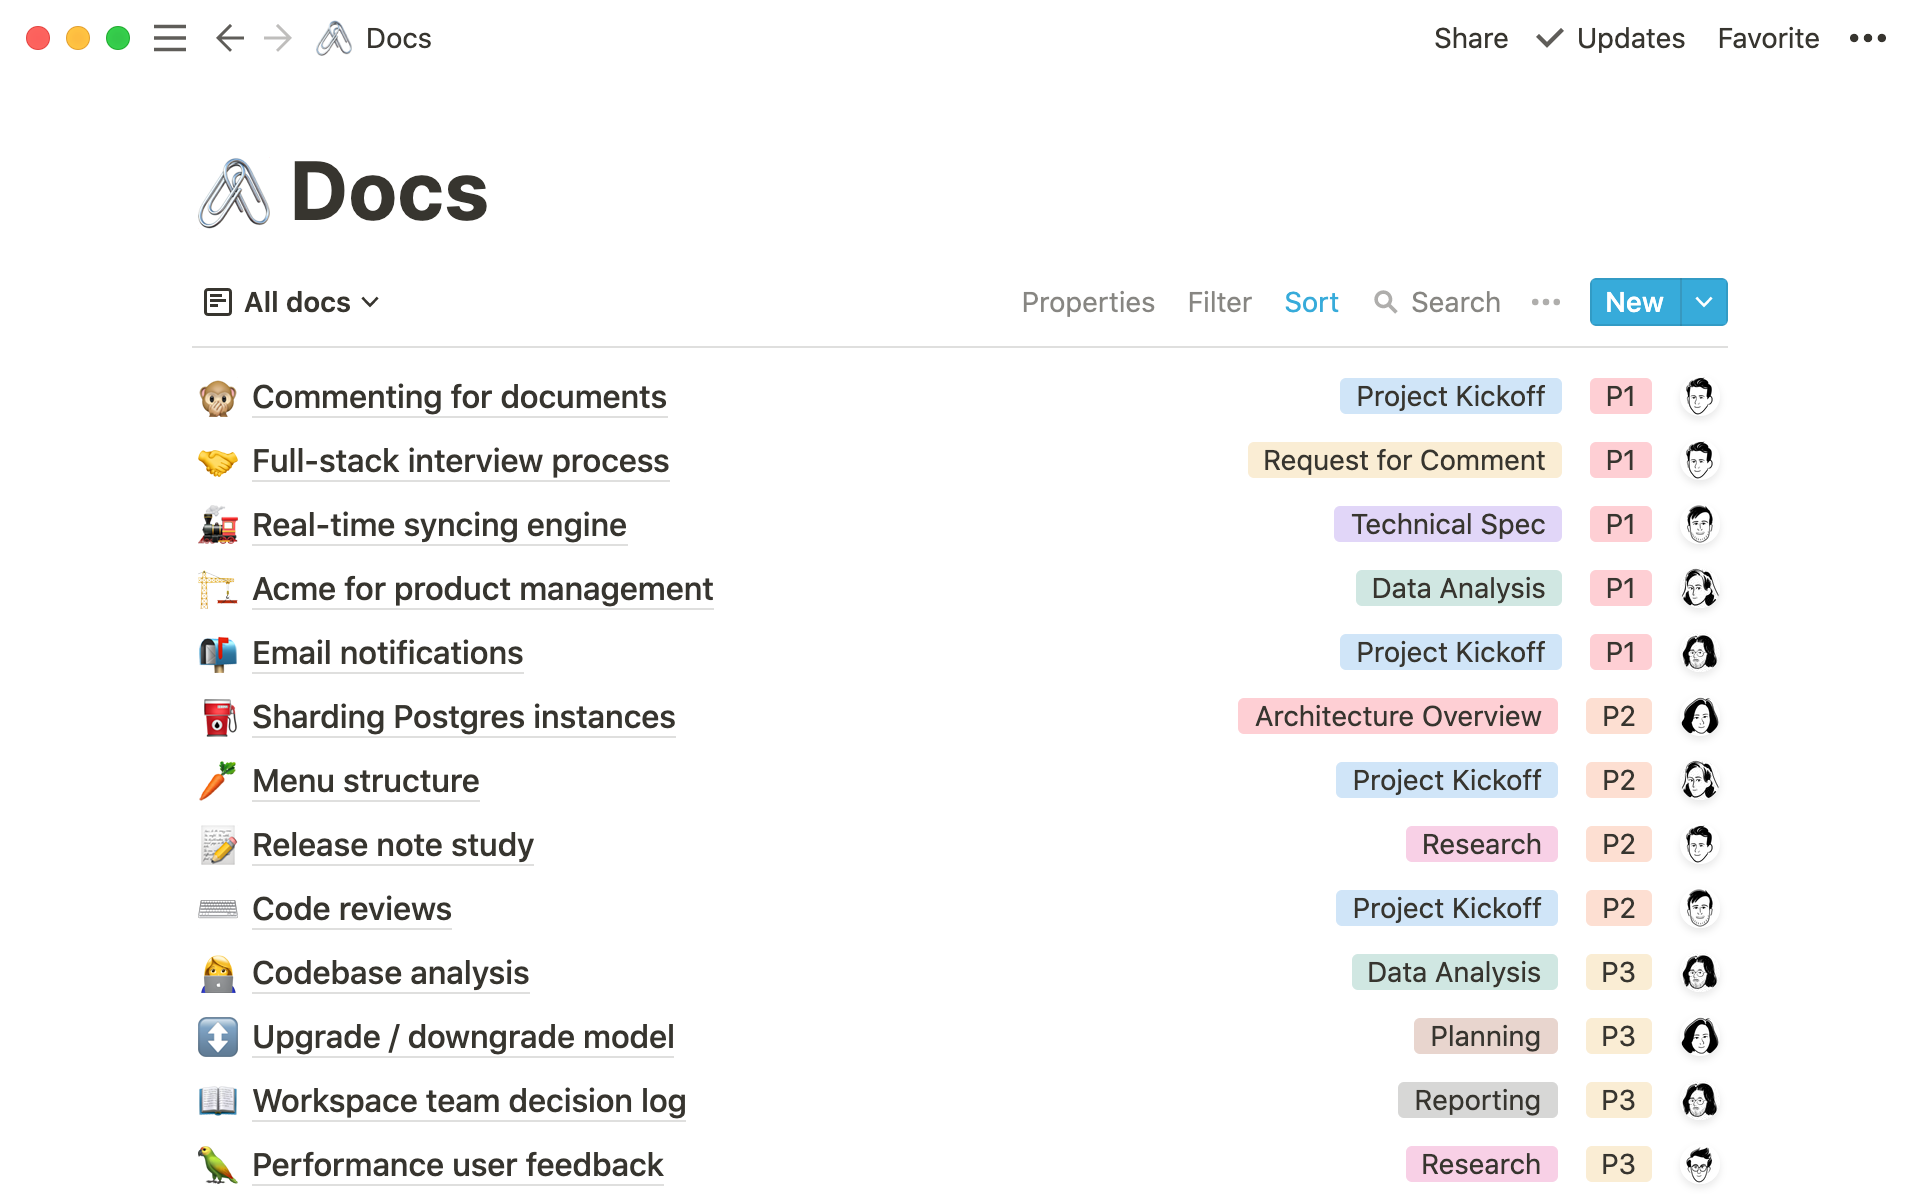 Lists are a good way to organize docs that are all related and show their relevant properties.